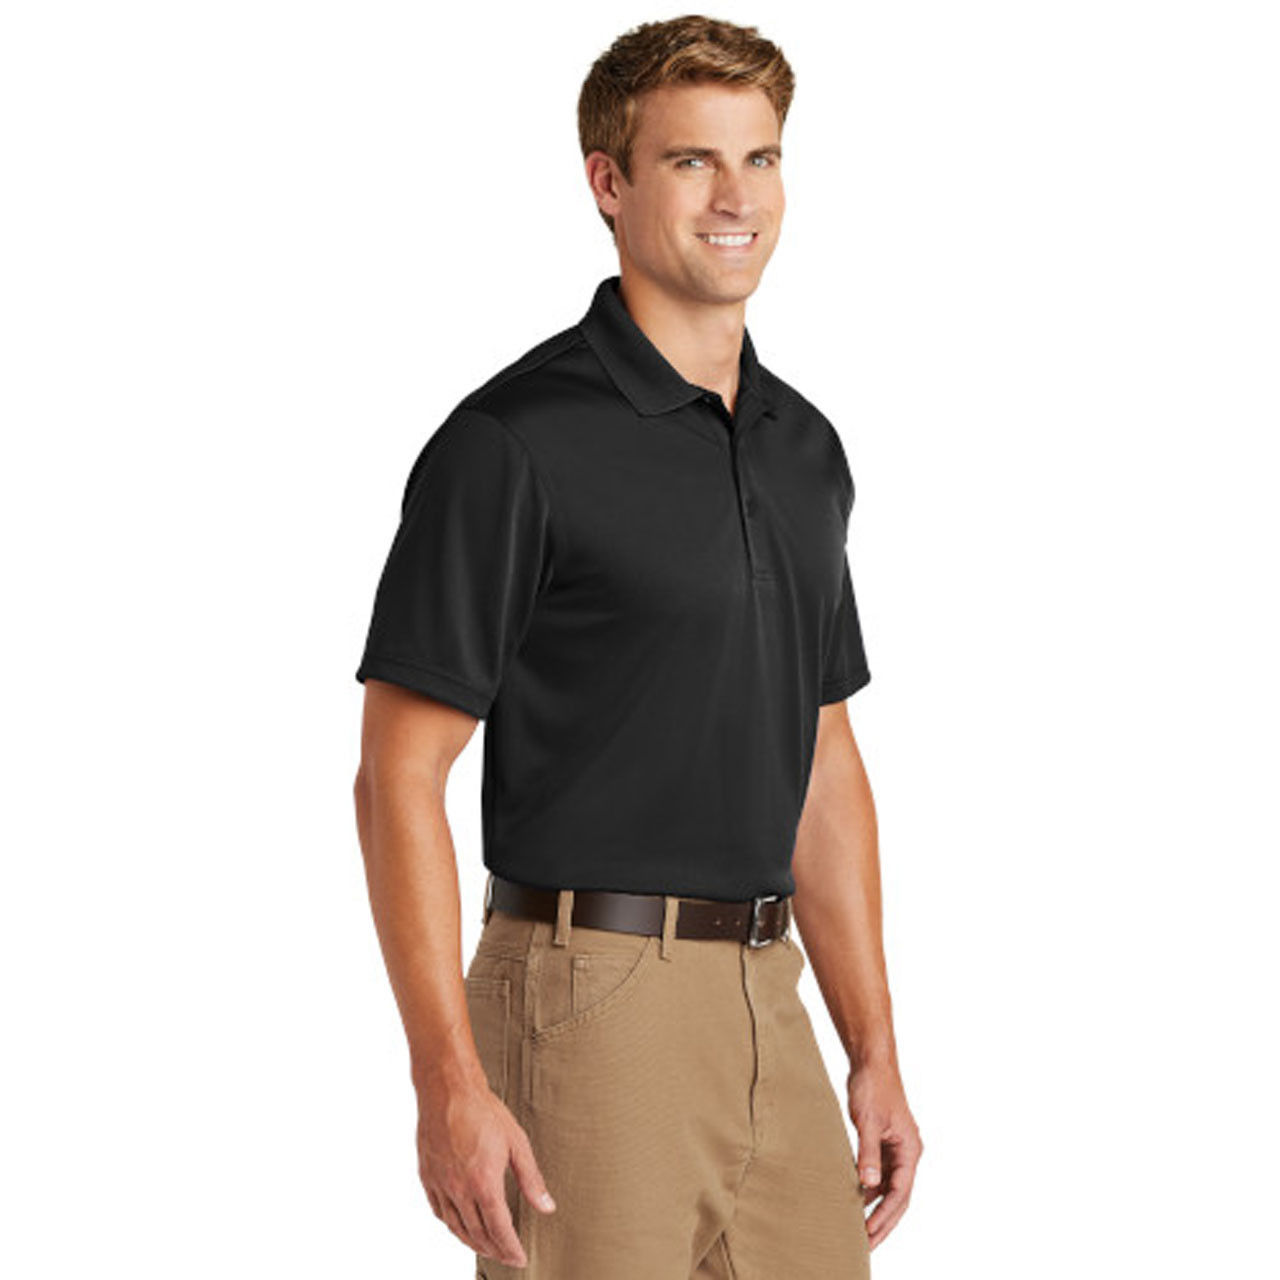 Does the men's black polo shirt have any vents?